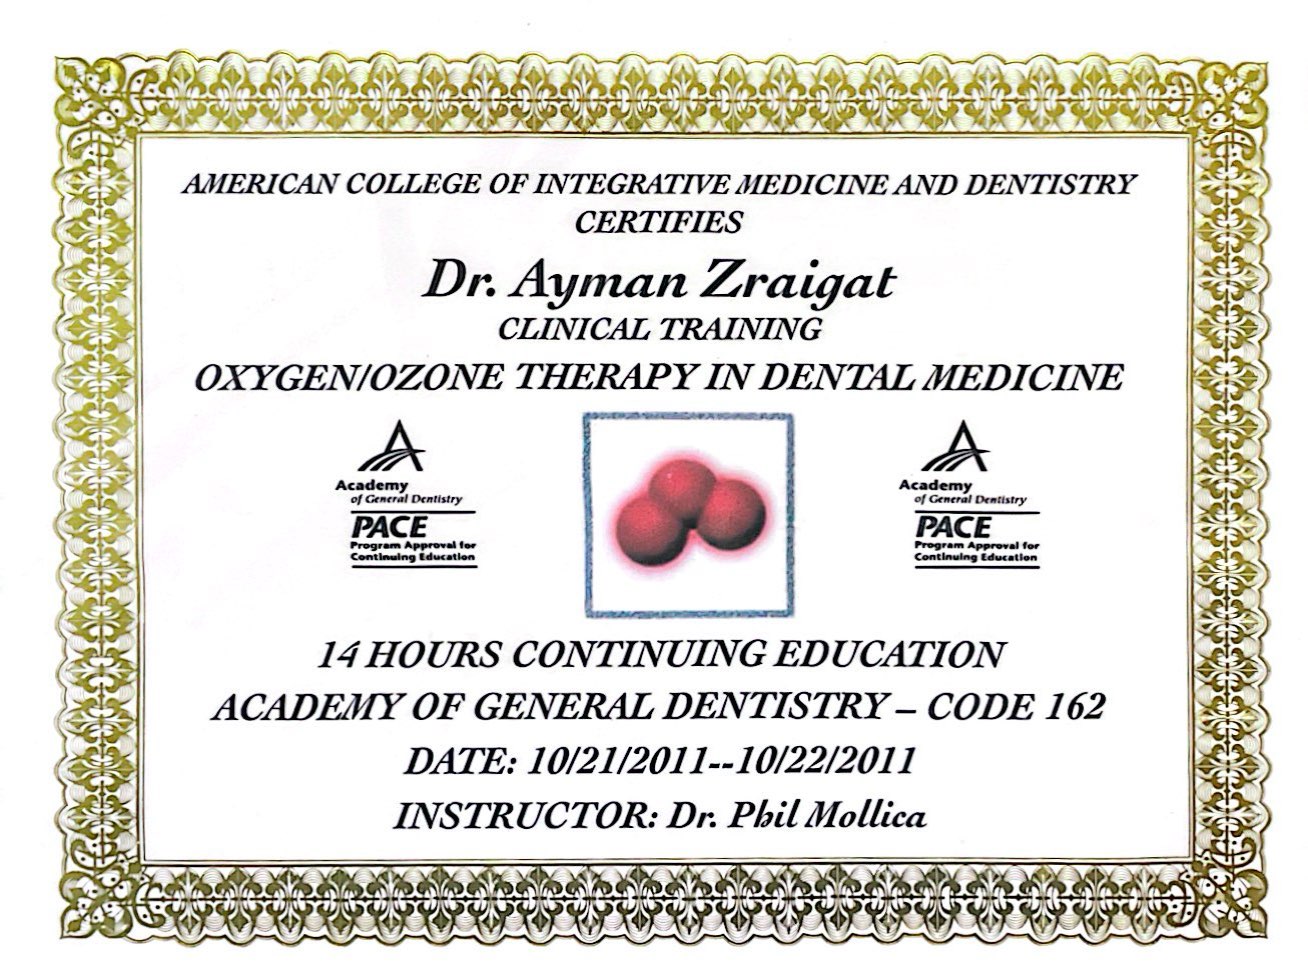 Certificate of completion for Dr. Ayman Zraigat in Oxygen/Ozone Therapy in Dental Medicine, dated 10/21/2011 to 10/22/2011.